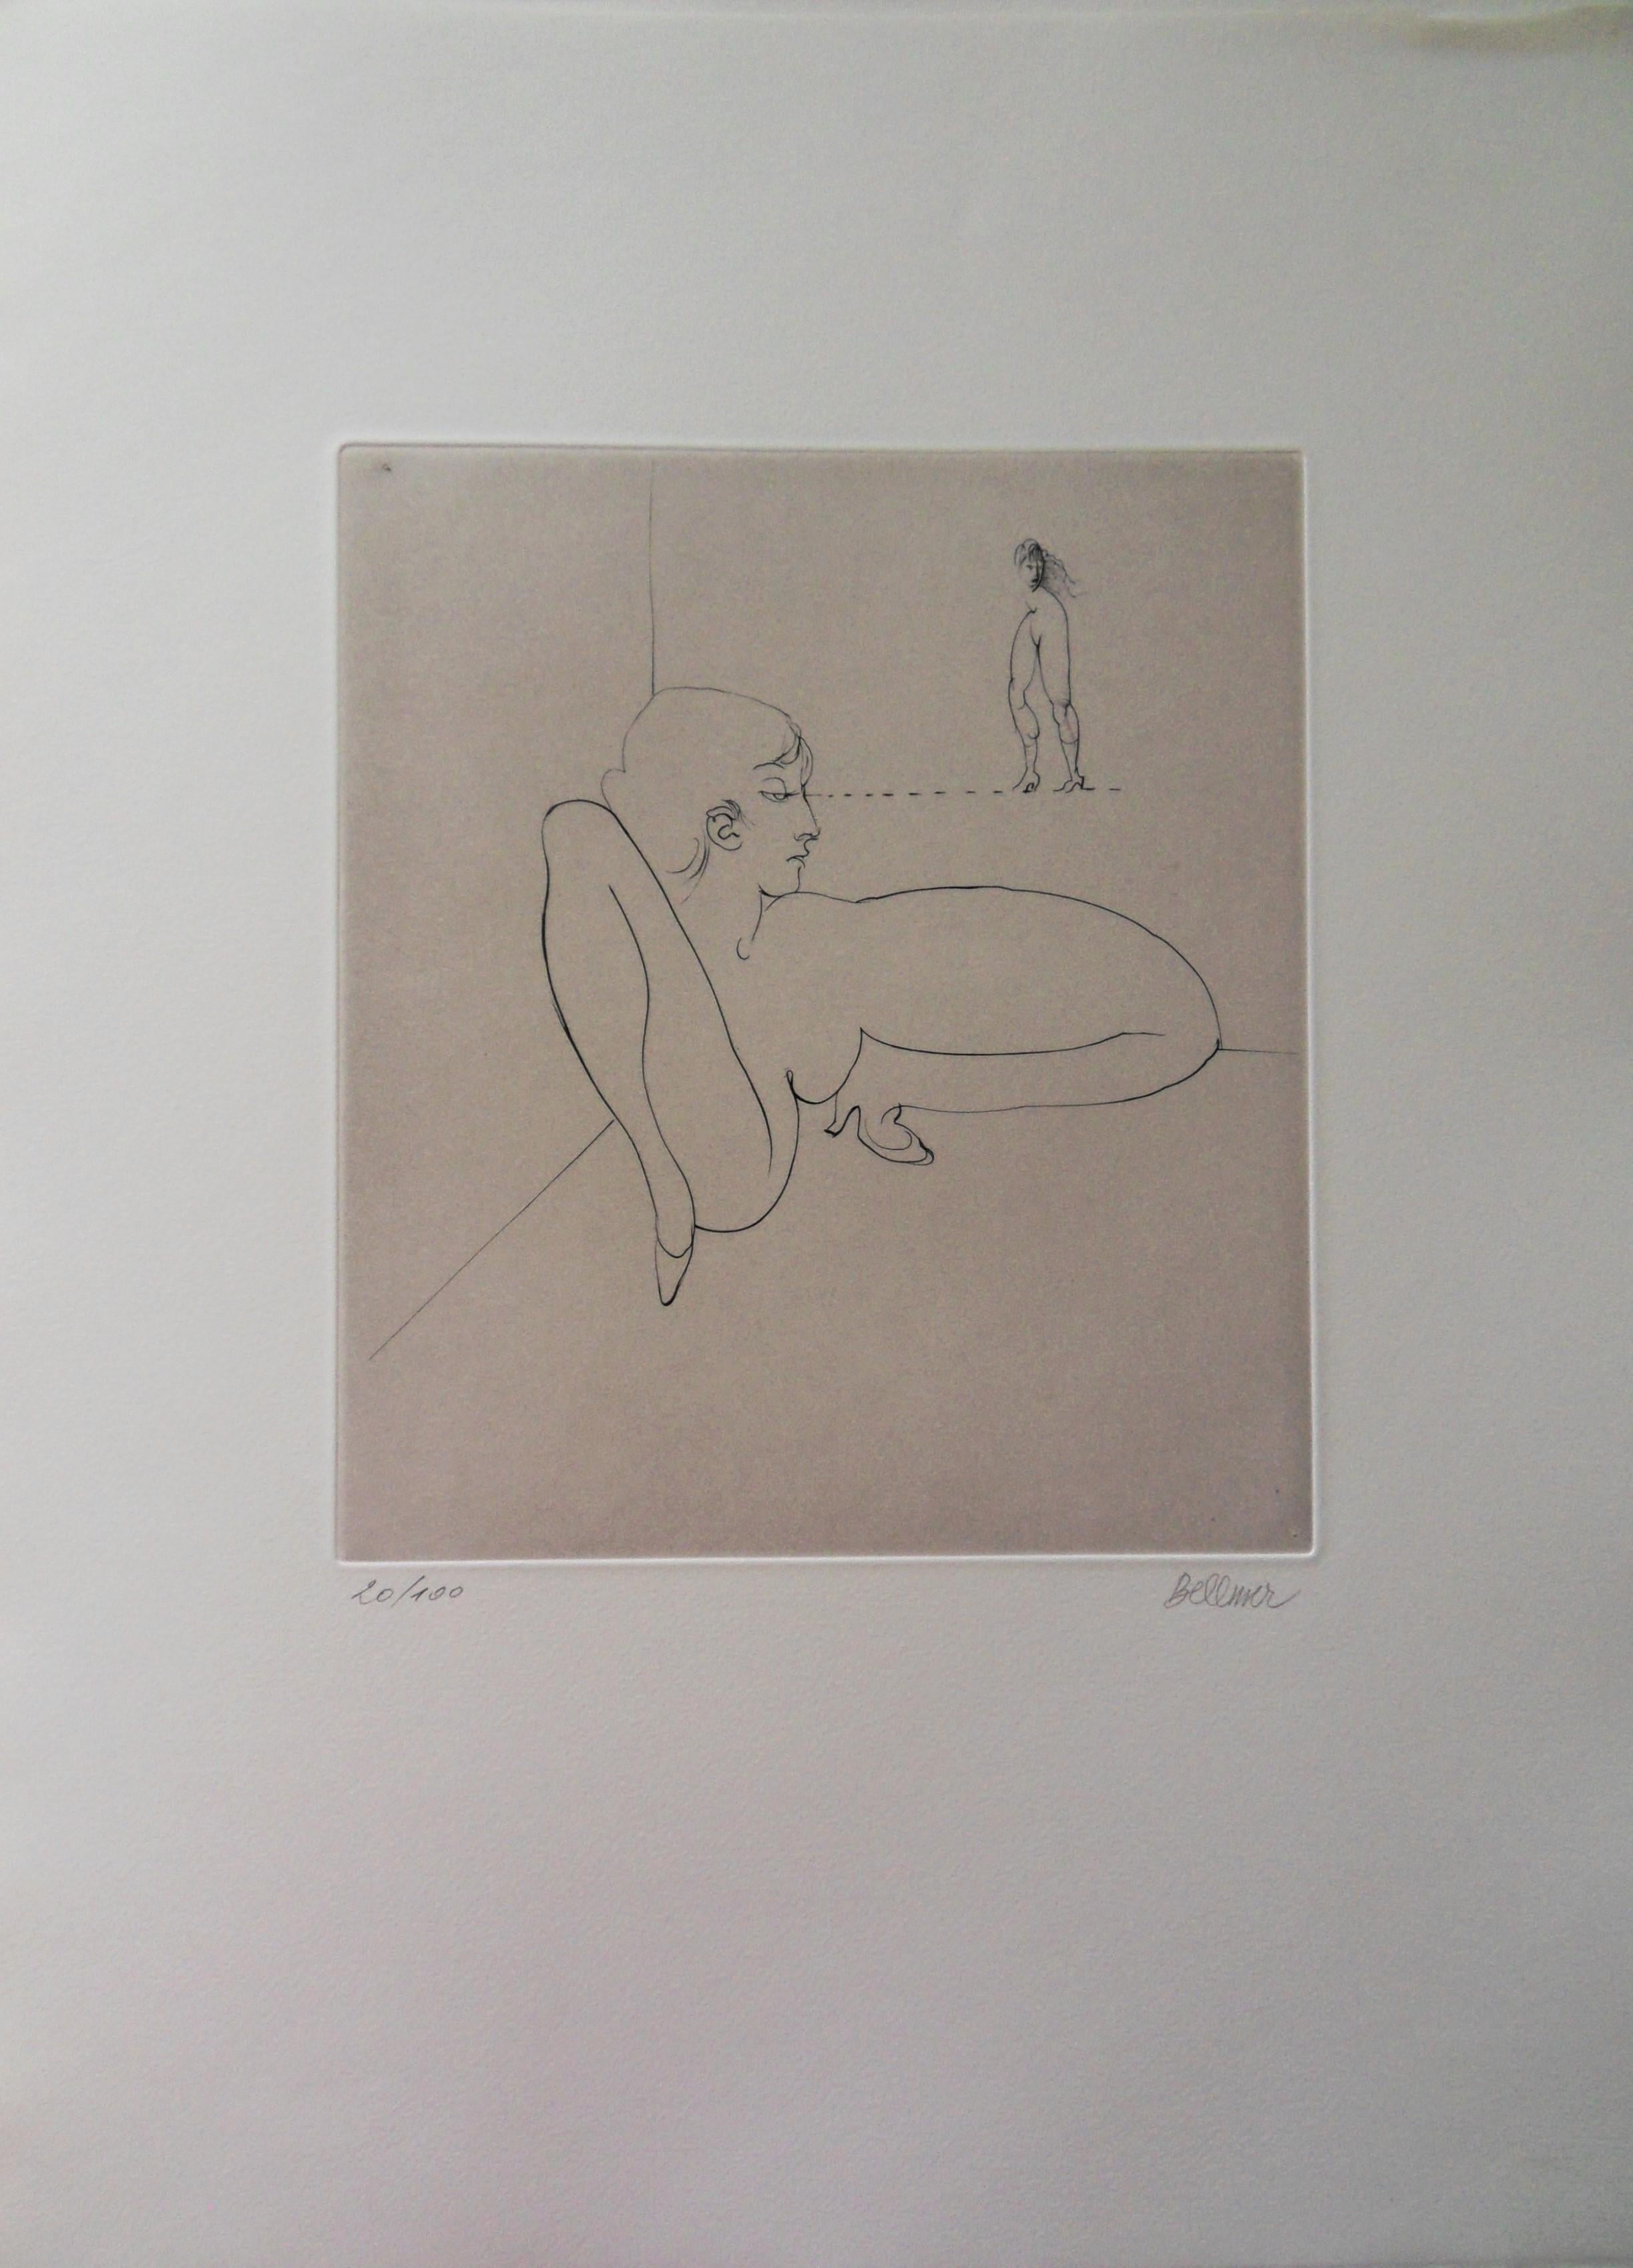 Hans Bellmer Figurative Print - The Staring Woman - Original Etching Handsigned, Numbered